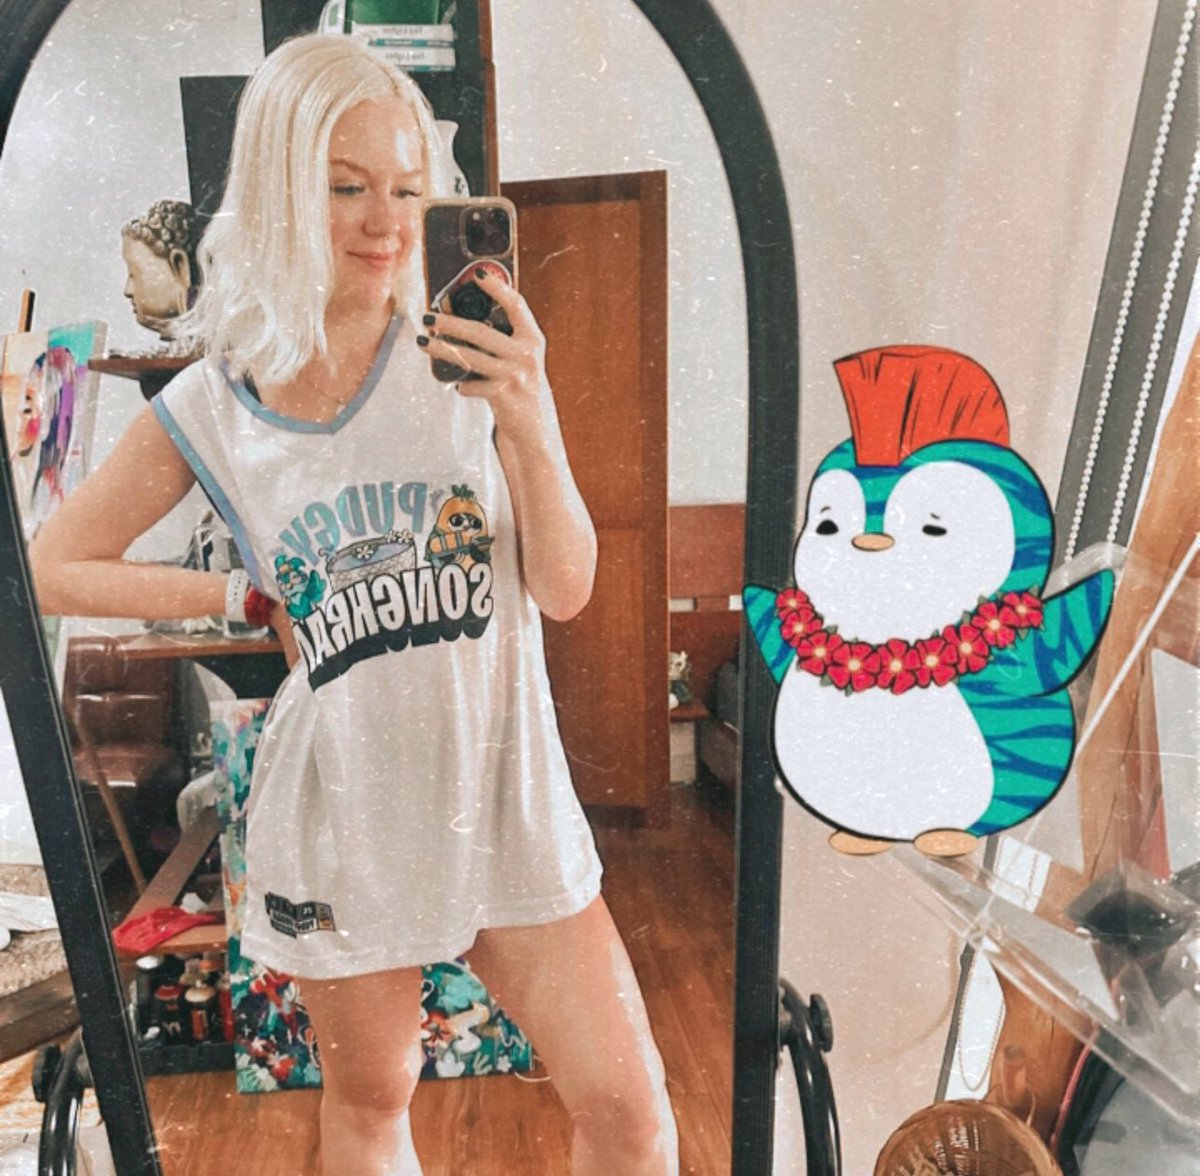 GM! 🌞 think I’ve just about recovered from the epicness of Songkran with @PudgyAsia 🐧✨ Thanks again to @NatChittamai + @bbbbammee! & especially for the cute merch :3 💦🔫 also shoutout to @phaverapp for sponsoring the legendary PudgyHouse! 🩵